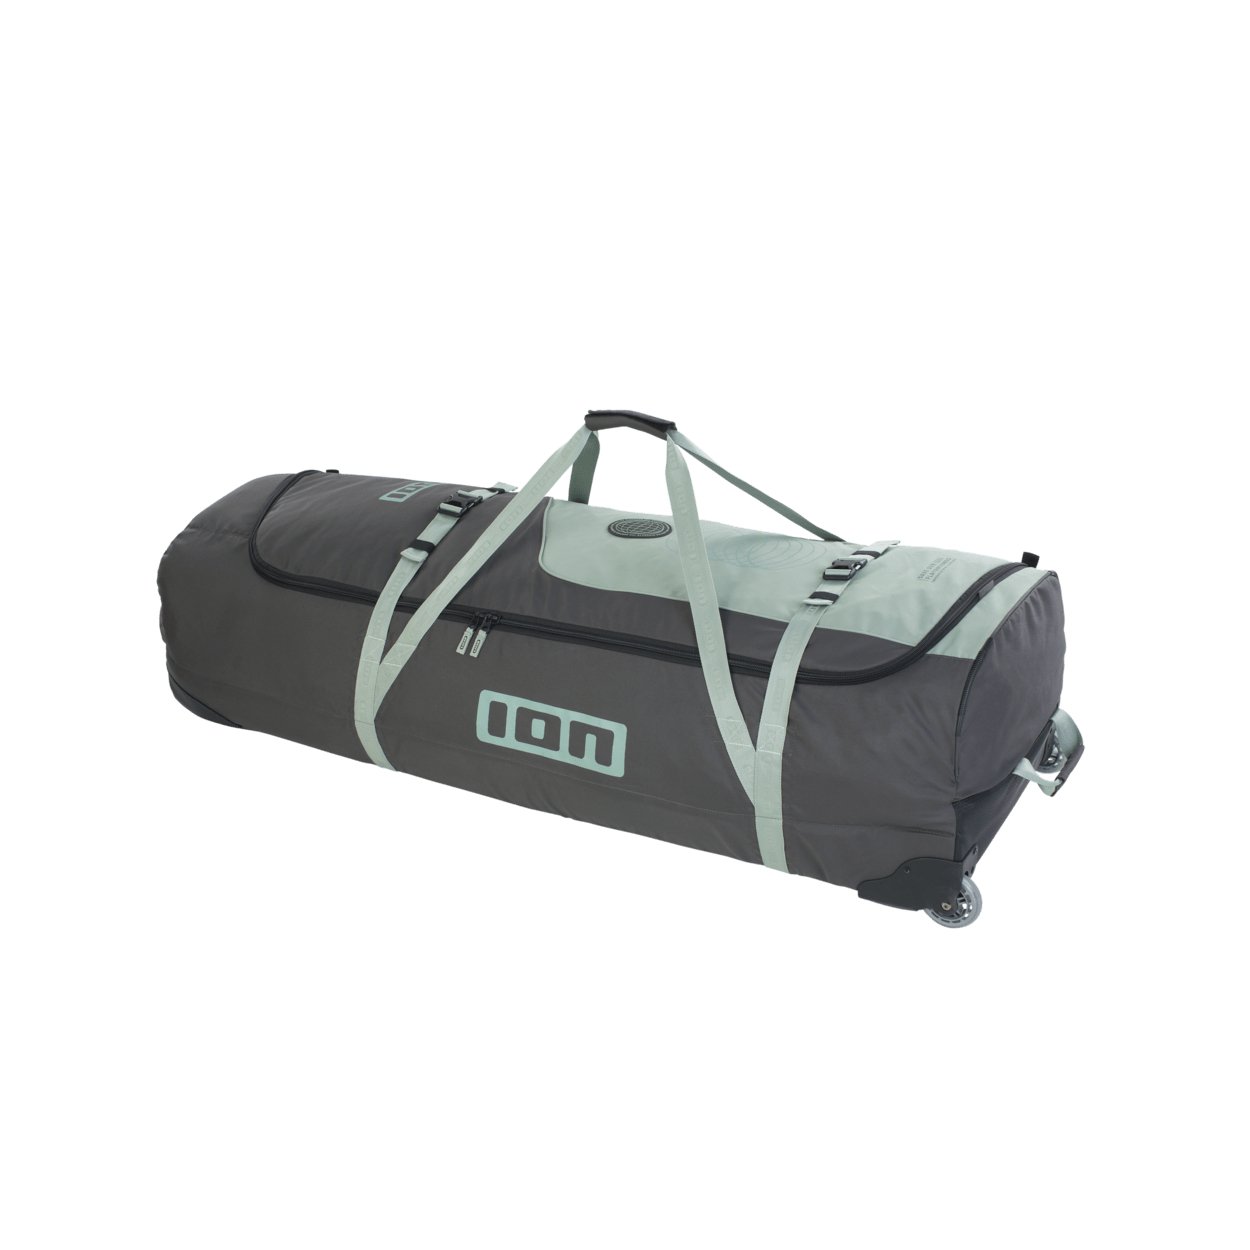 ION Gearbag Core Kite 2023 - Worthing Watersports - 9010583126371 - Bags - ION Water